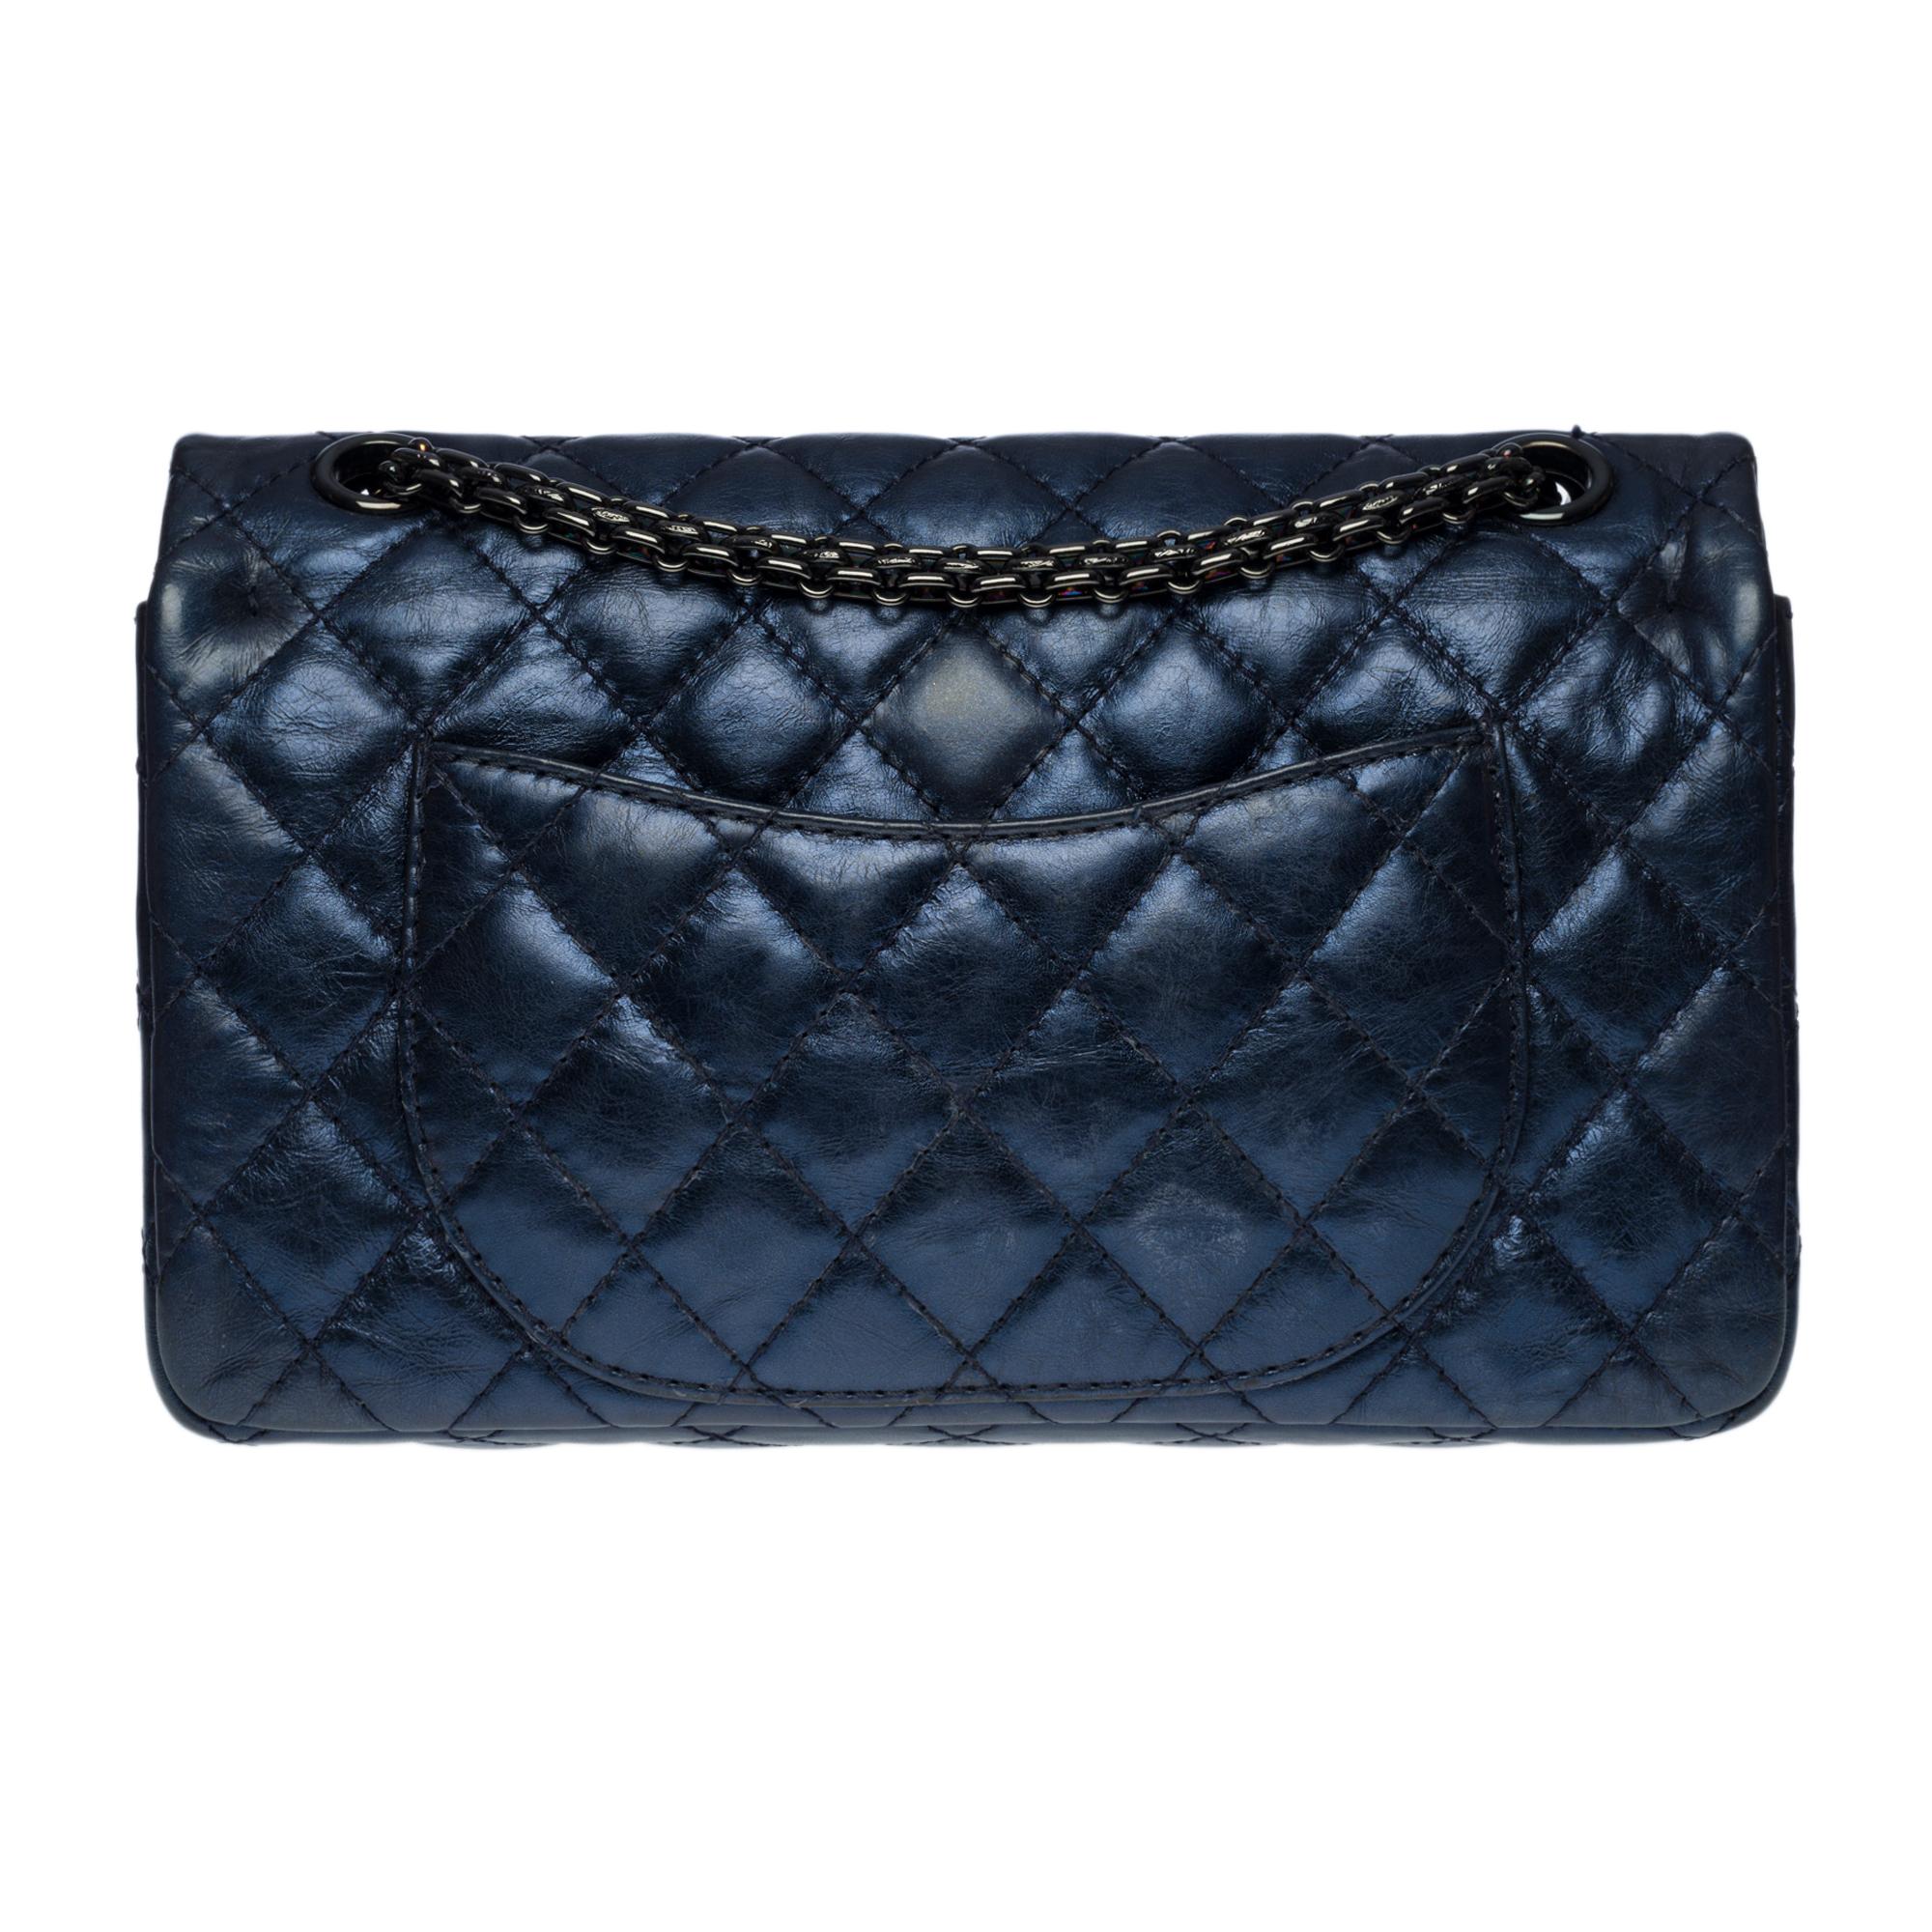 Splendid and Rare Chanel 2.55 flap shoulder bag in metallic blue iridescent quilted leather, black ruthenium metal hardware, a black ruthenium metal Mademoiselle chain handle allowing a shoulder and shoulder strap
Backpack pocket
Flap closure, 2.55